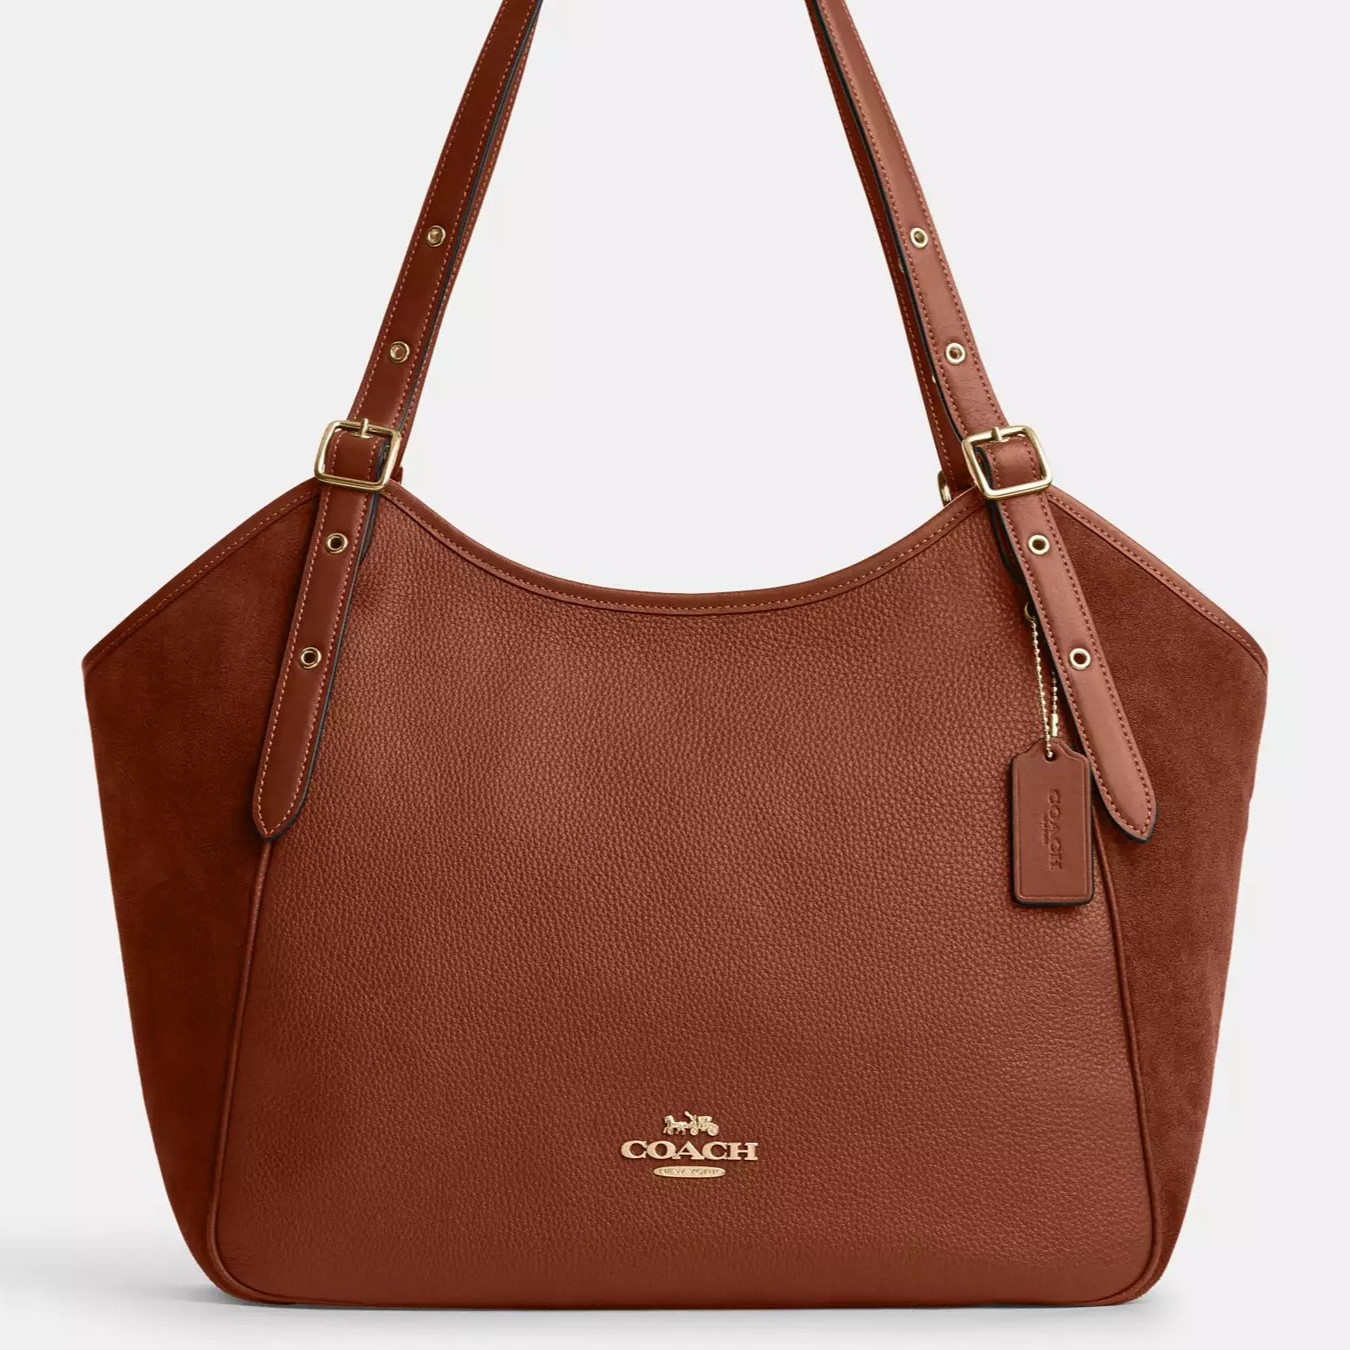 TÚI XÁCH NỮ COACH MEADOW SHOULDER BAG SUEDE AND REFINED PEBBLE LEATHER REDWOOD CM075 3